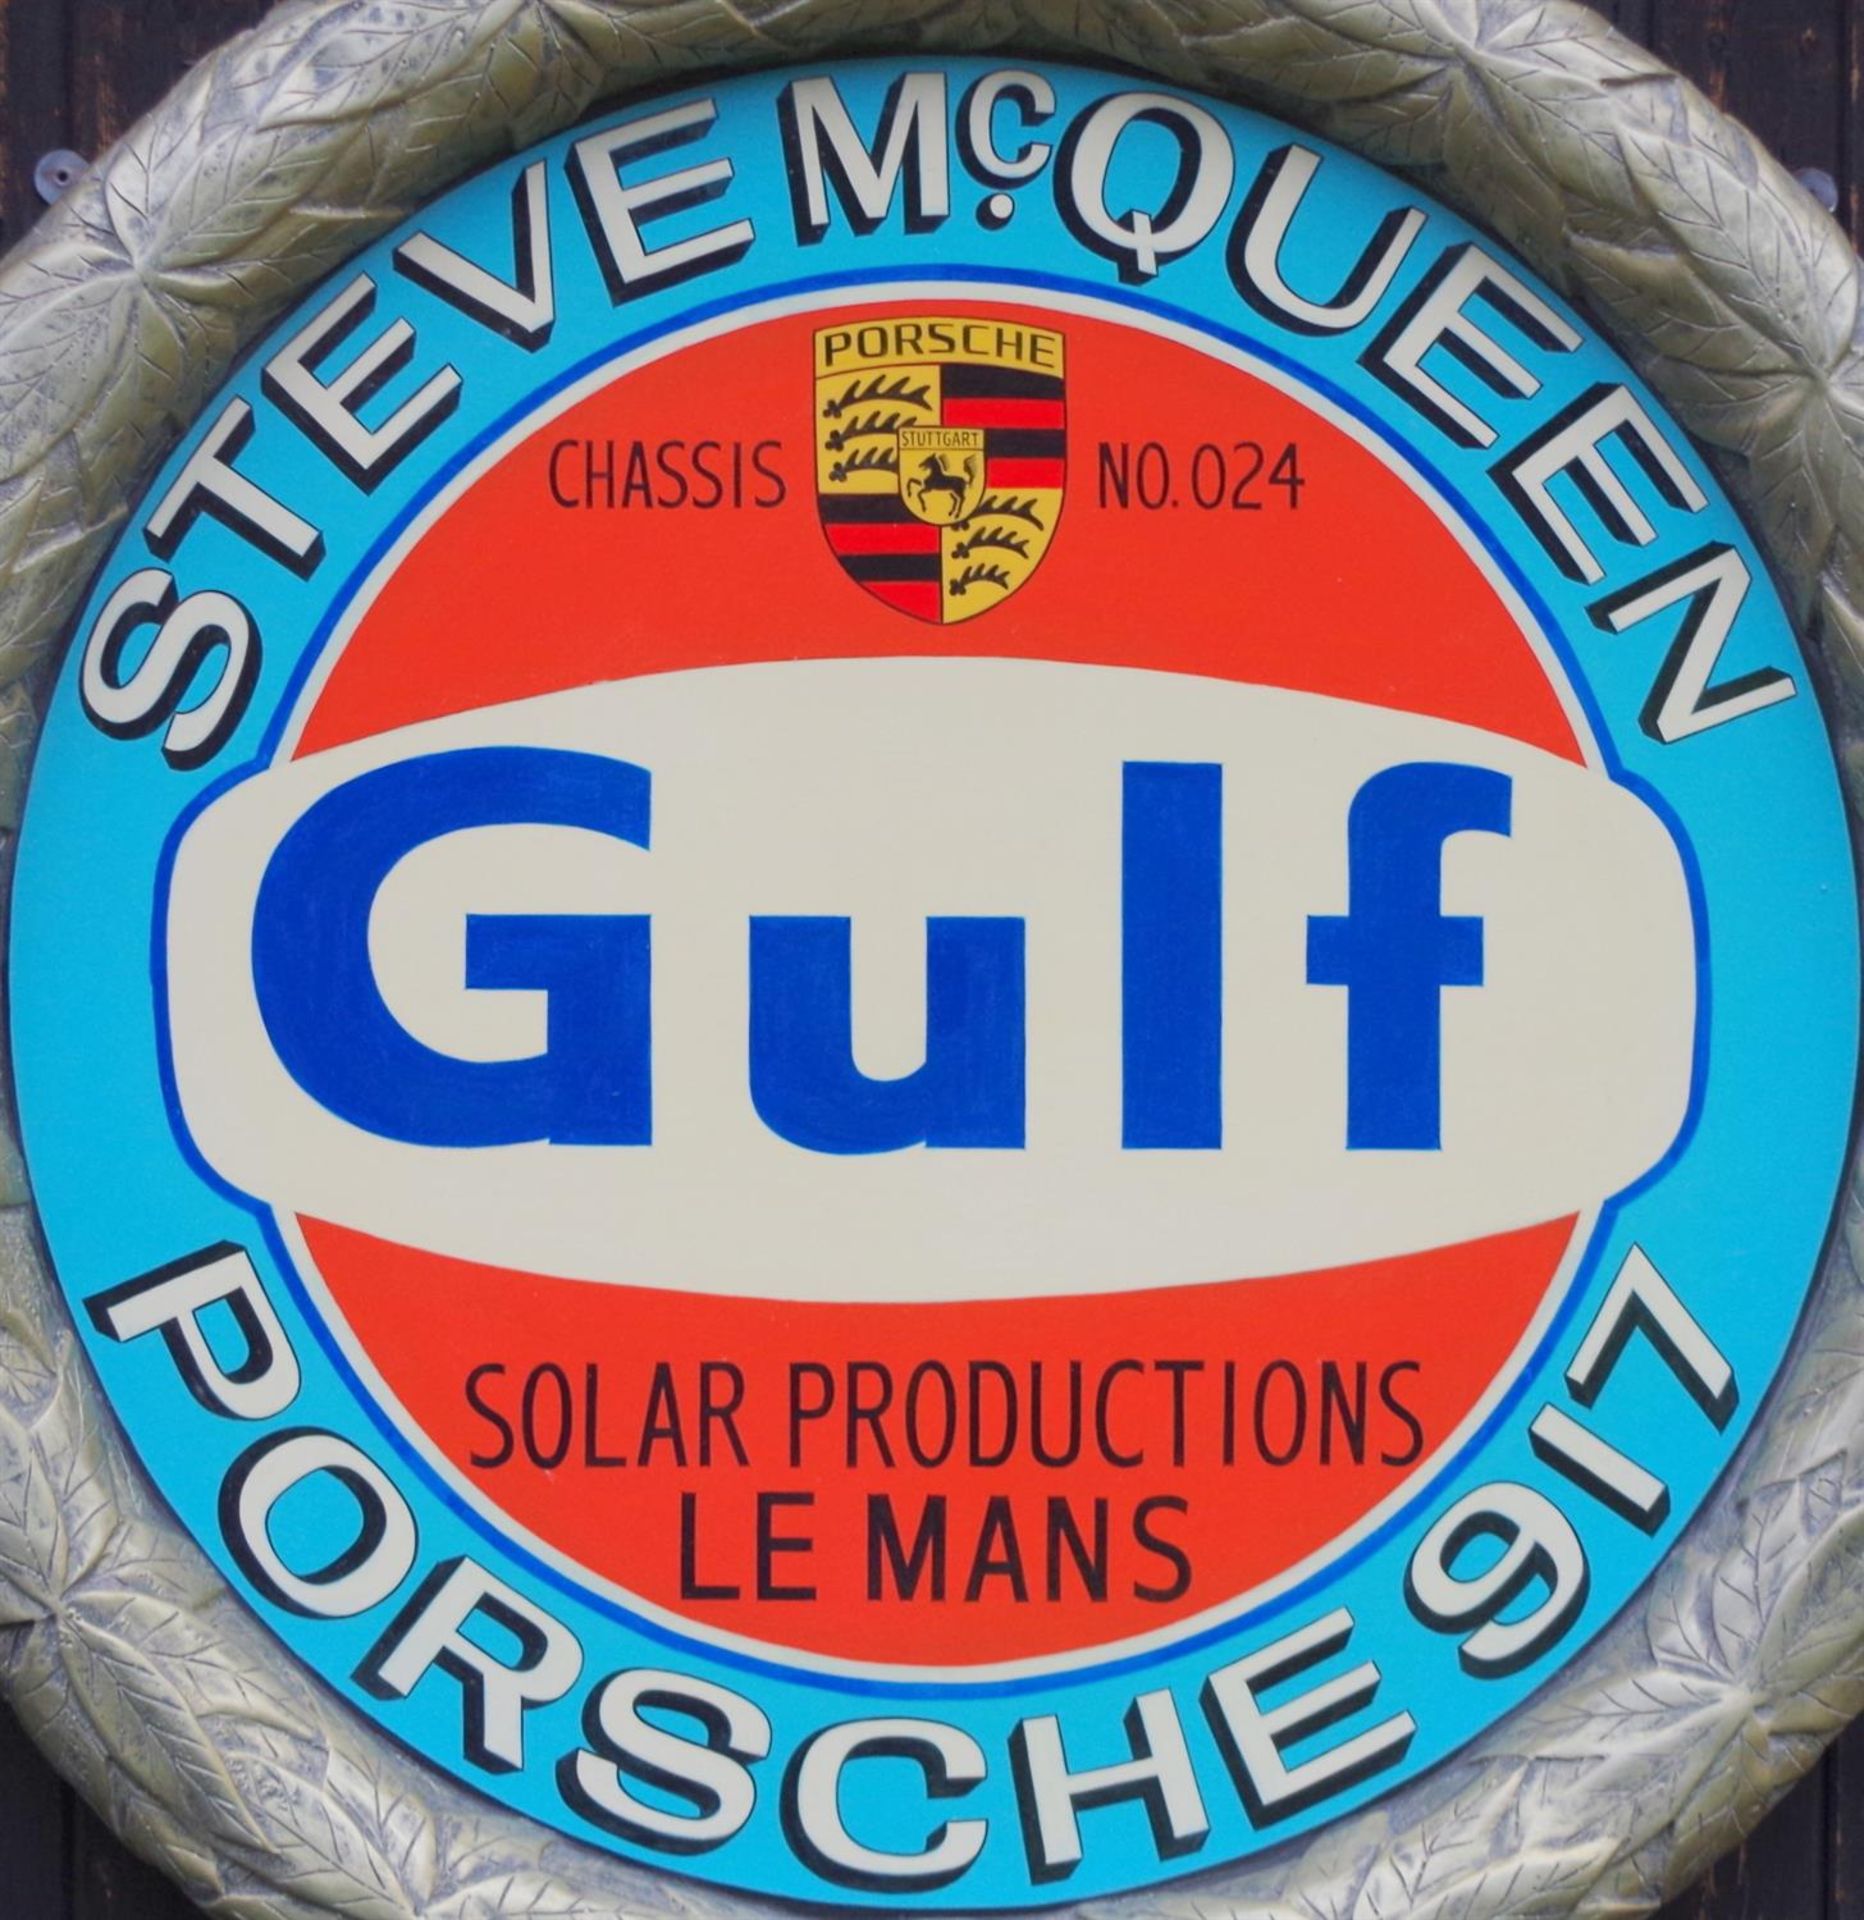 Gulf and Steve McQueen "Le Mans" Commemorative Wreath Roundel - Image 3 of 3